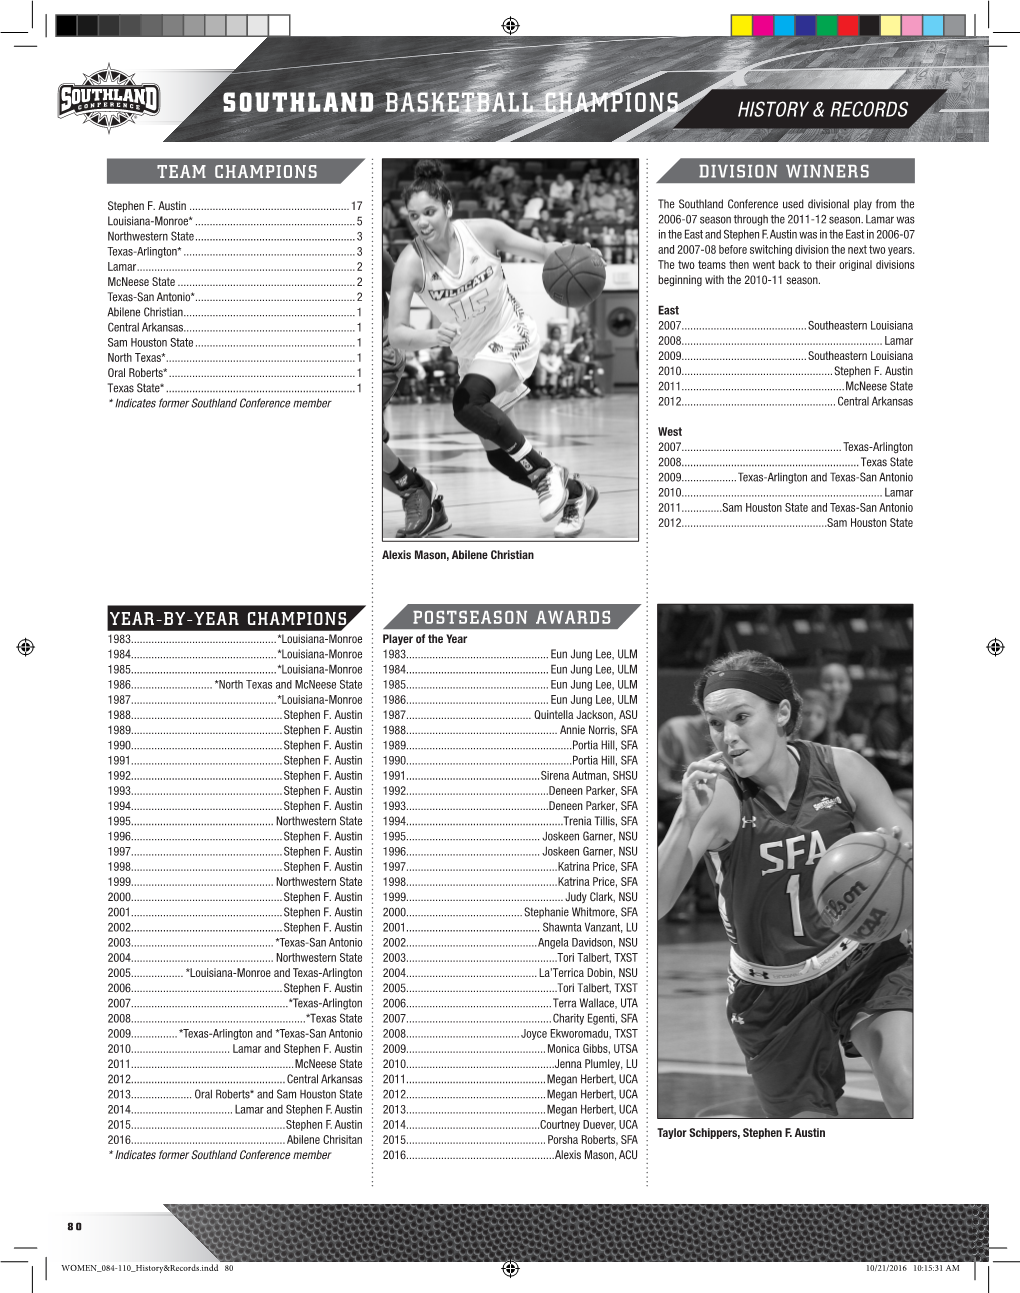 Southland Basketball Champions History & Records